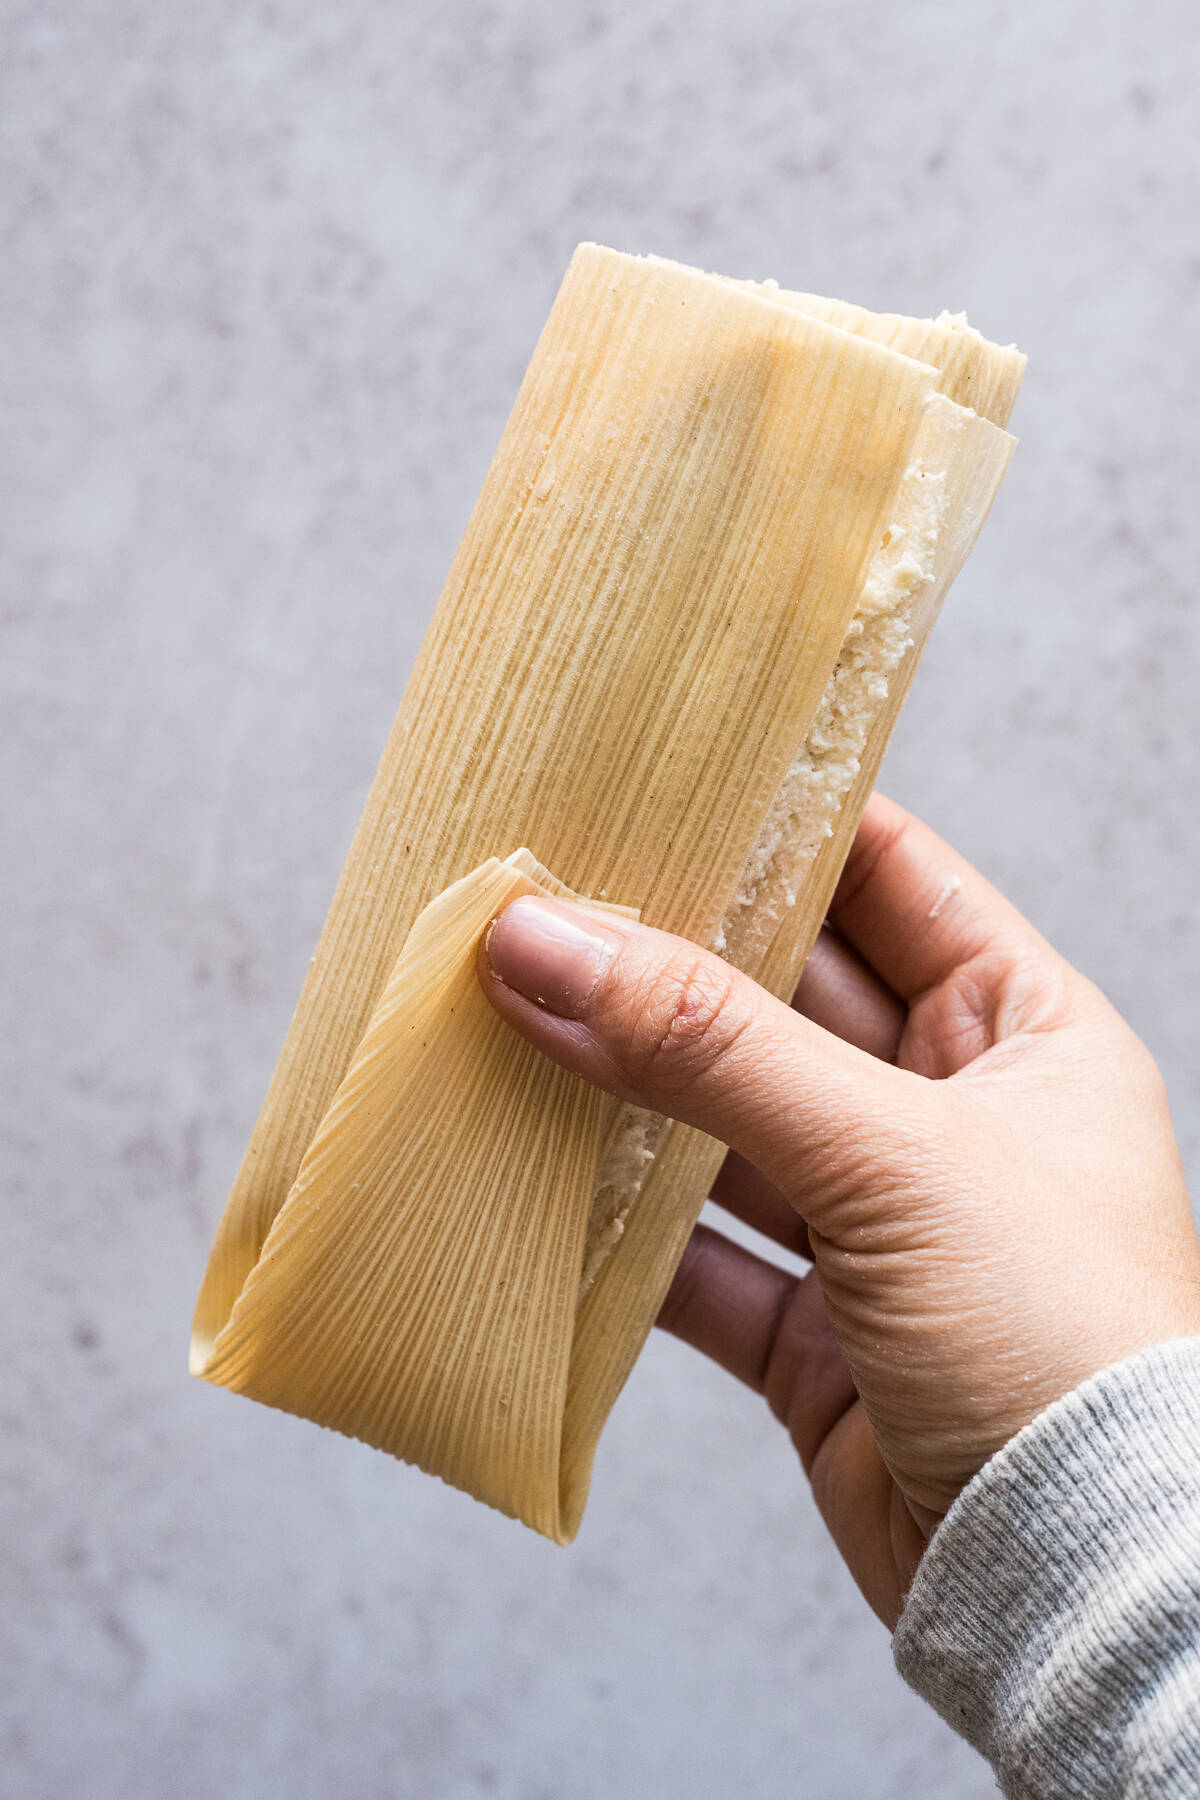 A folded tamale ready to be steamed and cooked.